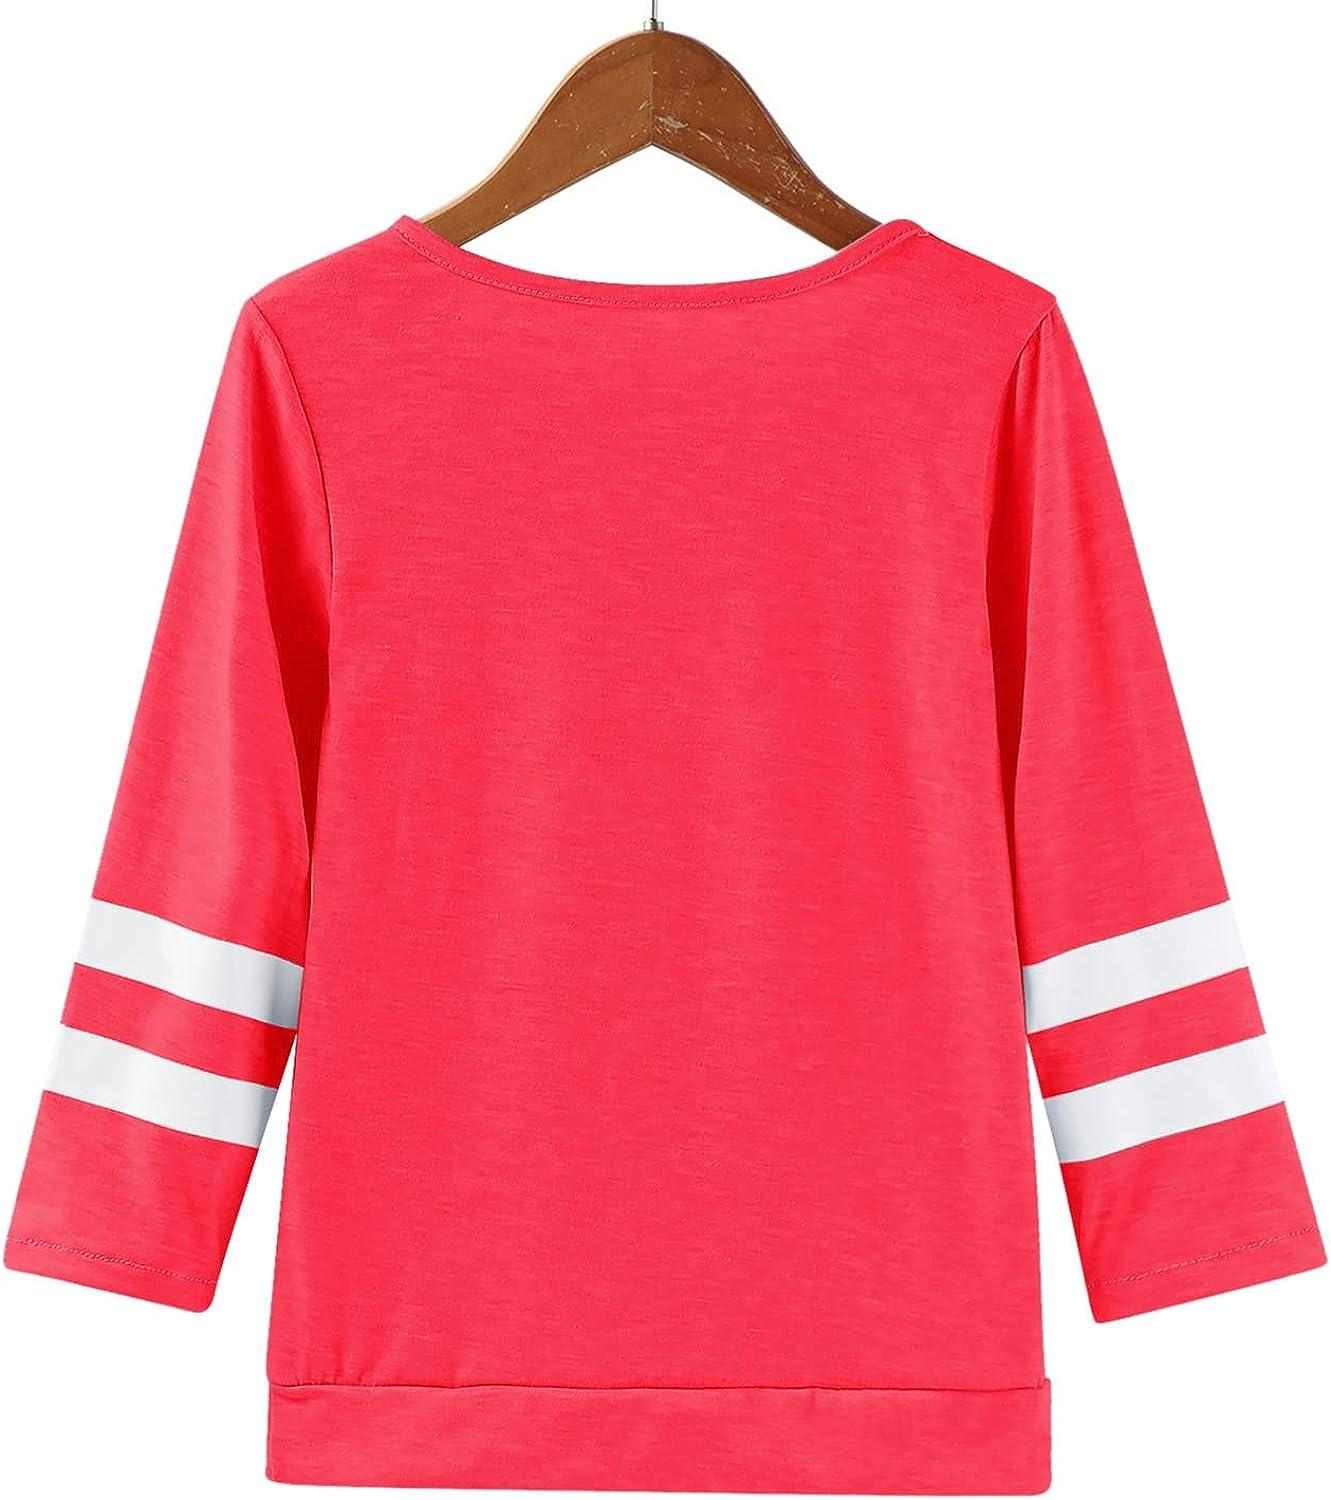  WUAI-Women Teen Girls Cute Tee Shirt Long Sleeve Basic Crop Top  Round Neck Stretch Loose Pullover Tops Light Sweatshirt(Red,Small) : Office  Products